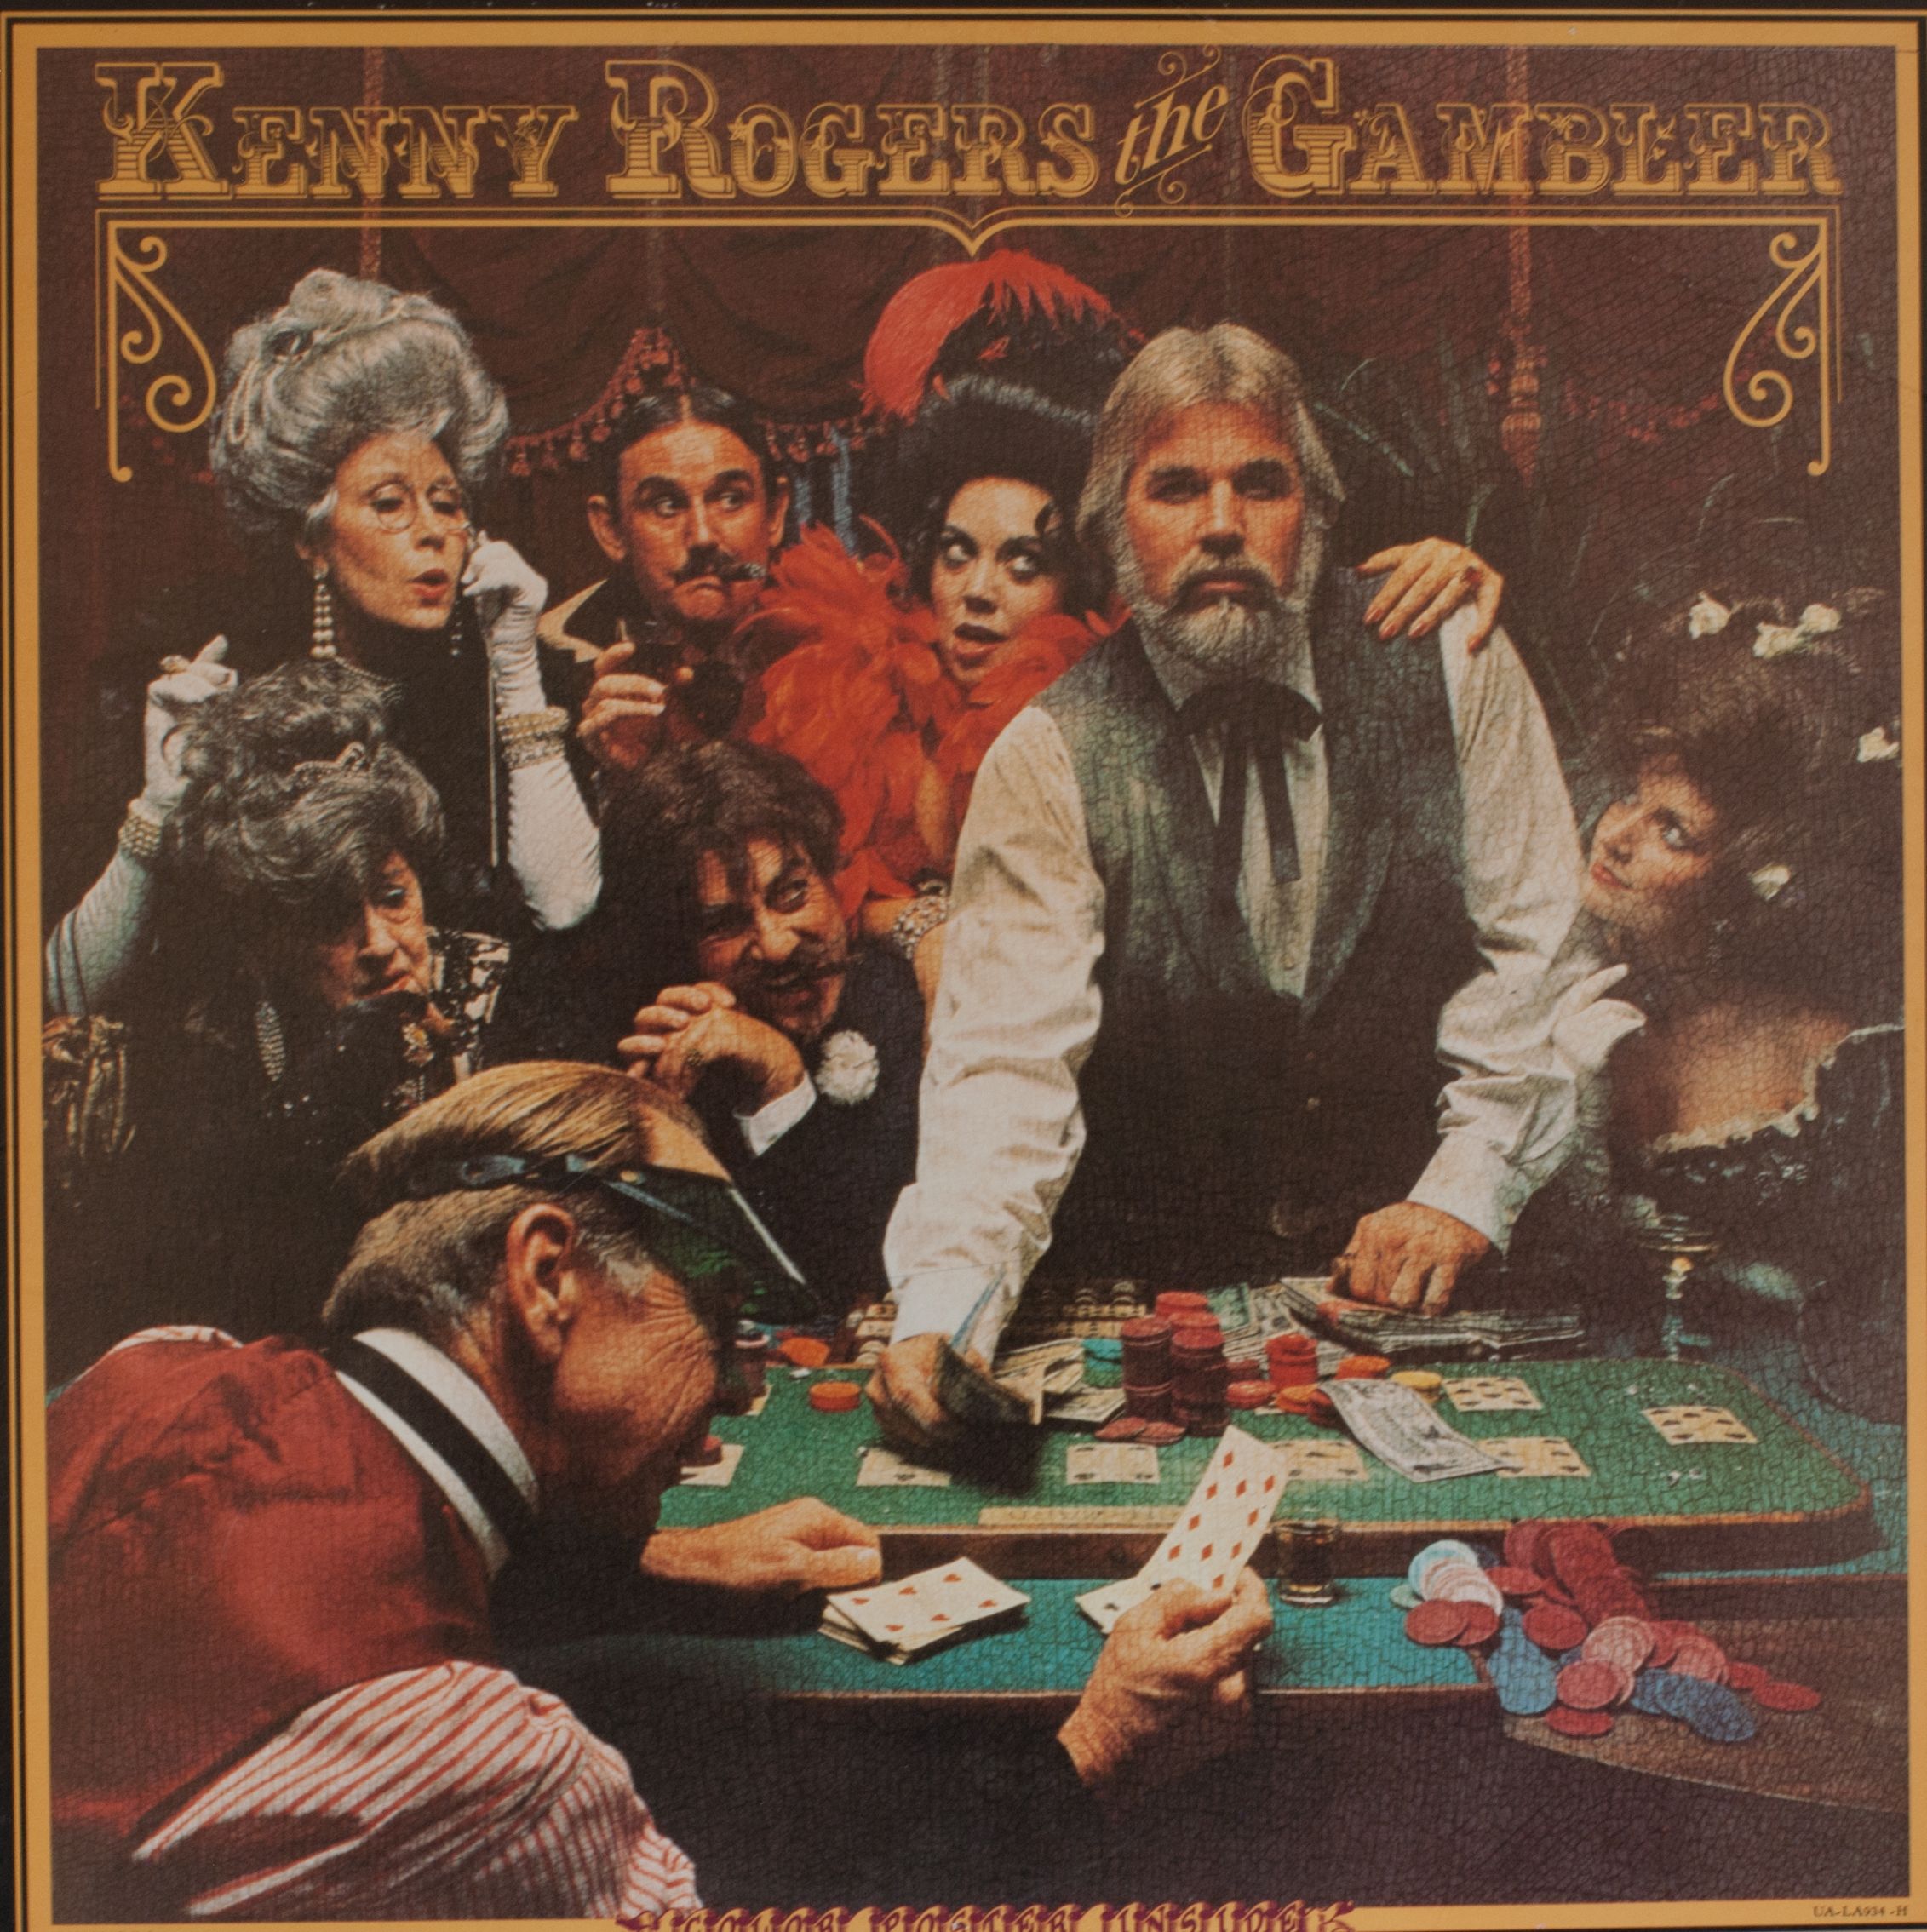 Kenny Rogers - The Gambler Album Cover